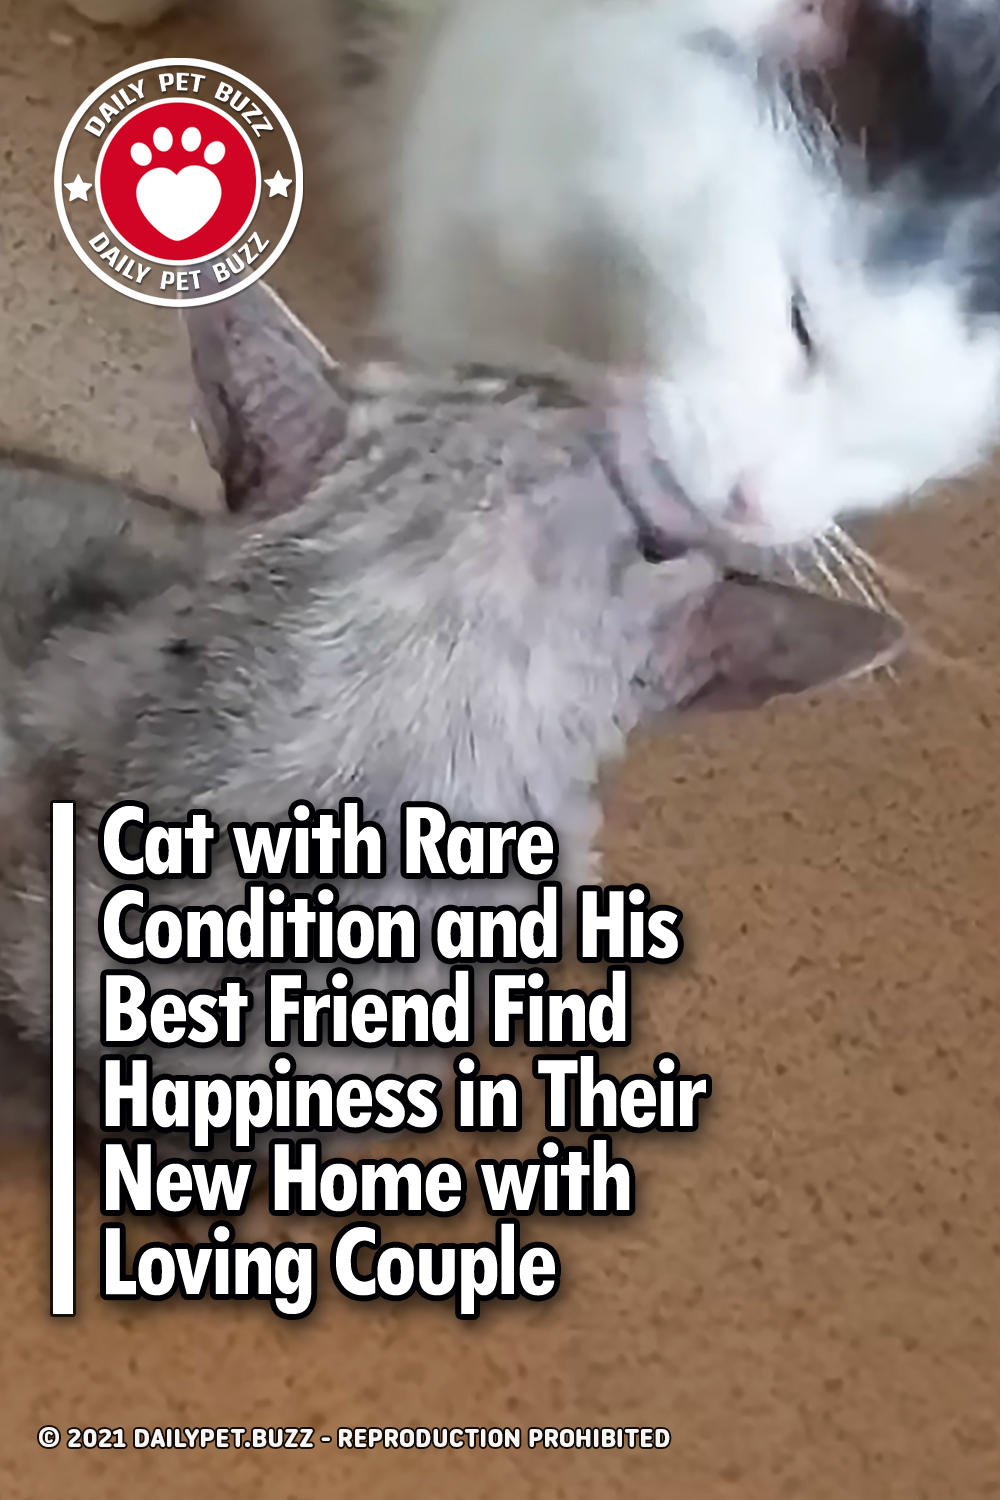 Cat with Rare Condition and His Best Friend Find Happiness in Their New Home with Loving Couple